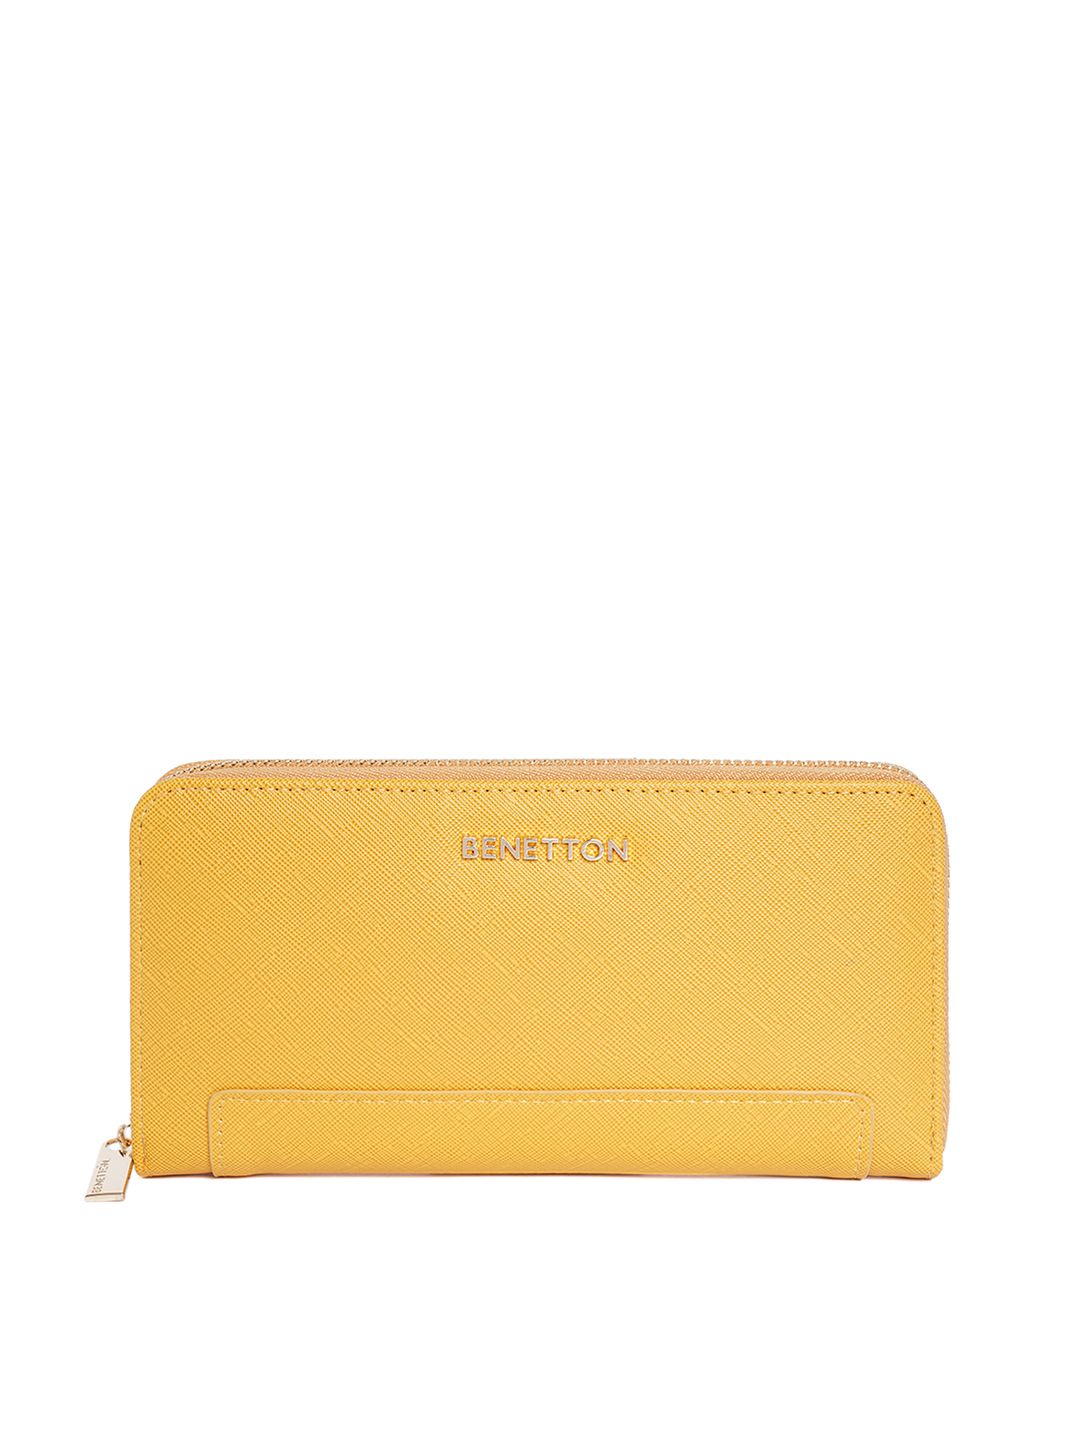 United Colors of Benetton Women Yellow Solid Synthetic Leather Zip Around Wallet Price in India